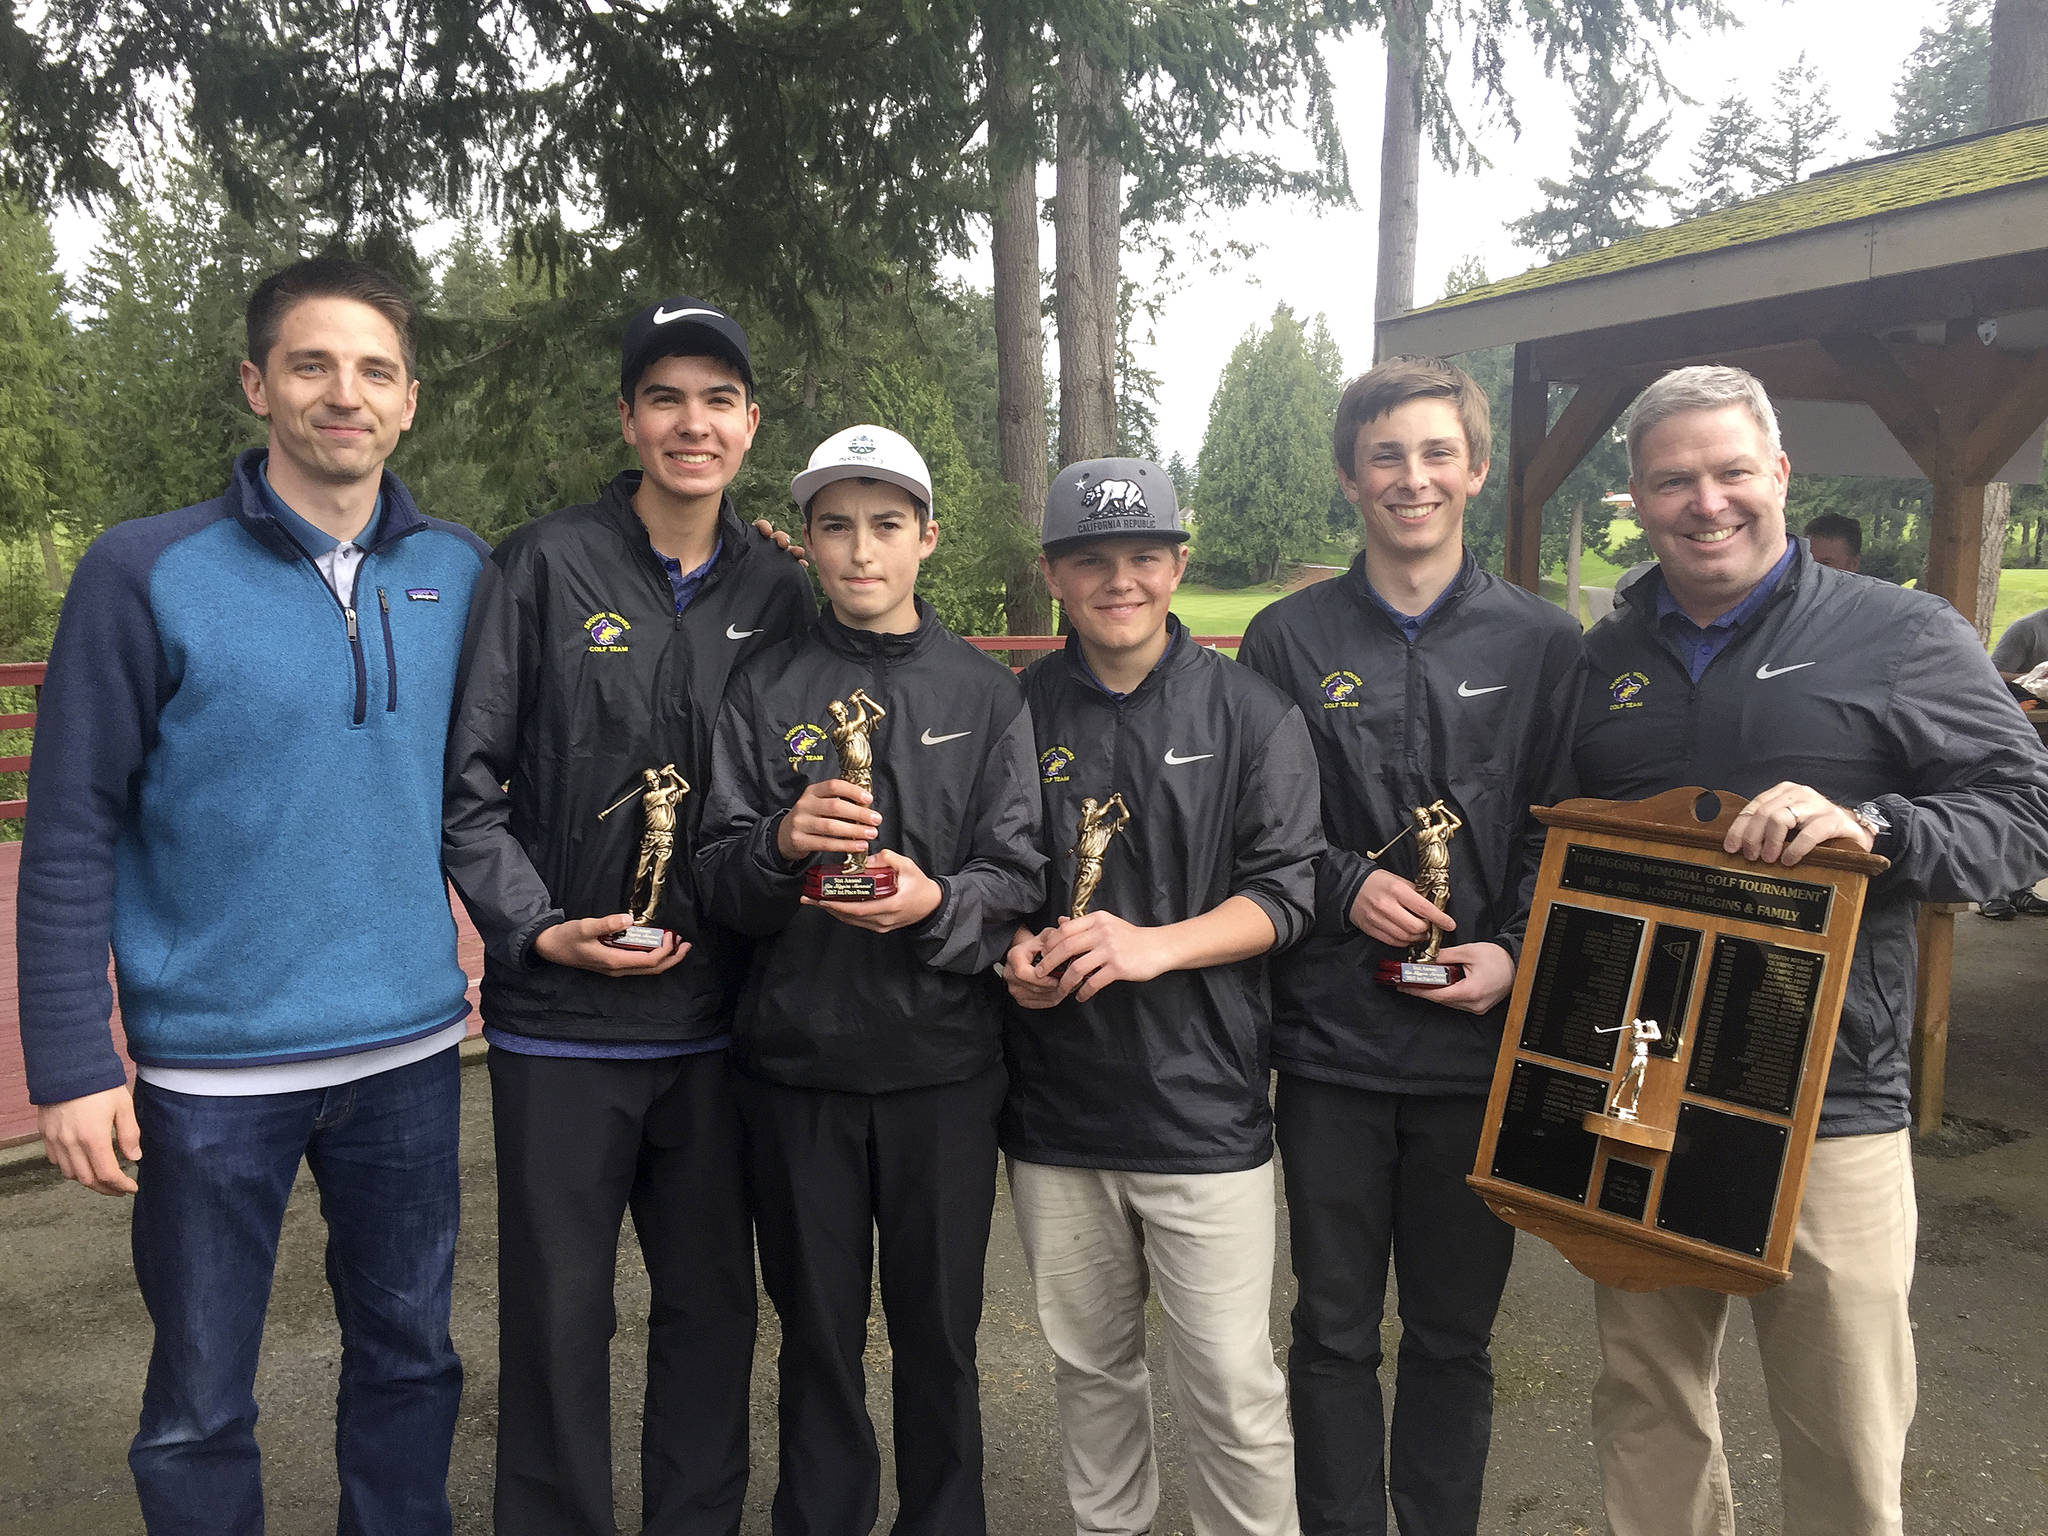 Under head coach Bill Shea (far right), the Sequim High School boys golf team celebrates defense of its title at the 51st annual Tim Higgins Memorial at Kitsap Golf and Country Club in Bremerton in 2017. Shea is stepping down from the coaching position this year after leading Sequim to four consecutive undefeated, Olympic League title-winning seasons. Pictured, from left, are assistant coach Sean O’Mera, Blake Wiker, Paul Jacobsen, Andrew Vanderberg, Josiah Carter and Shea. Submitted photo